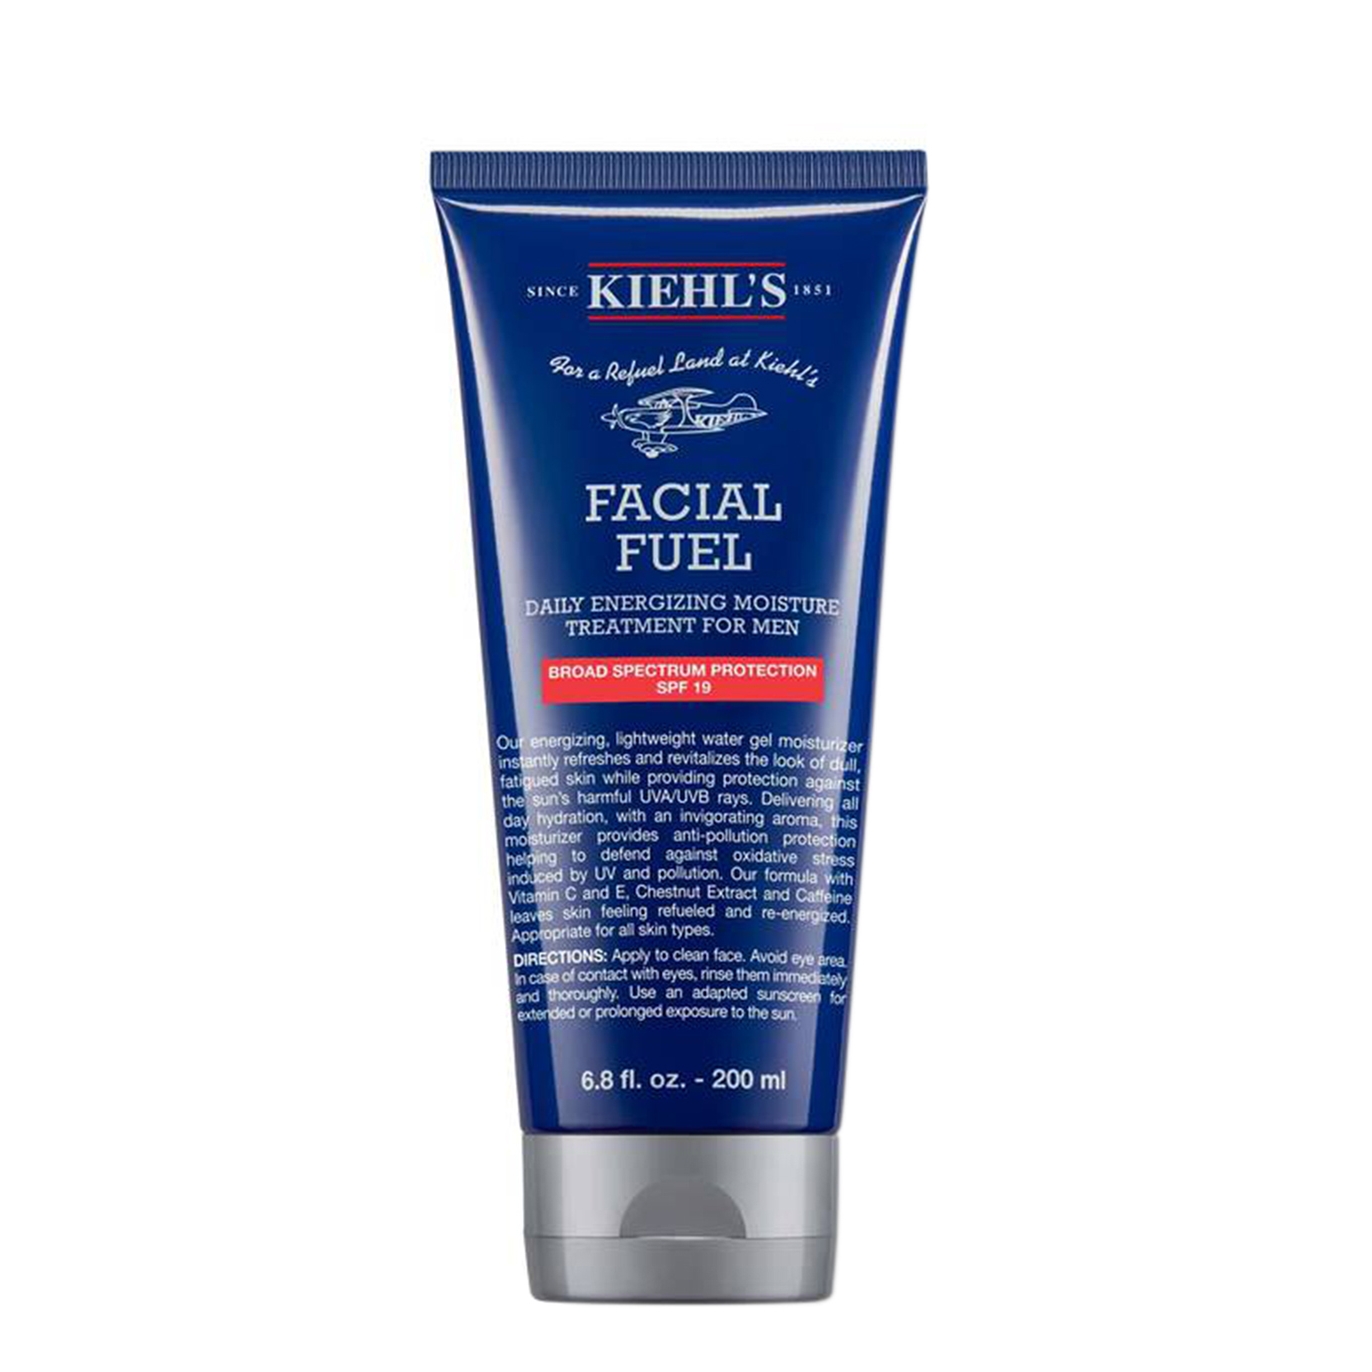 Kiehl's Since 1851 Kiehl's Facial Fuel Daily Energizing Moisture Treatment For Men Spf19 200ml In Na